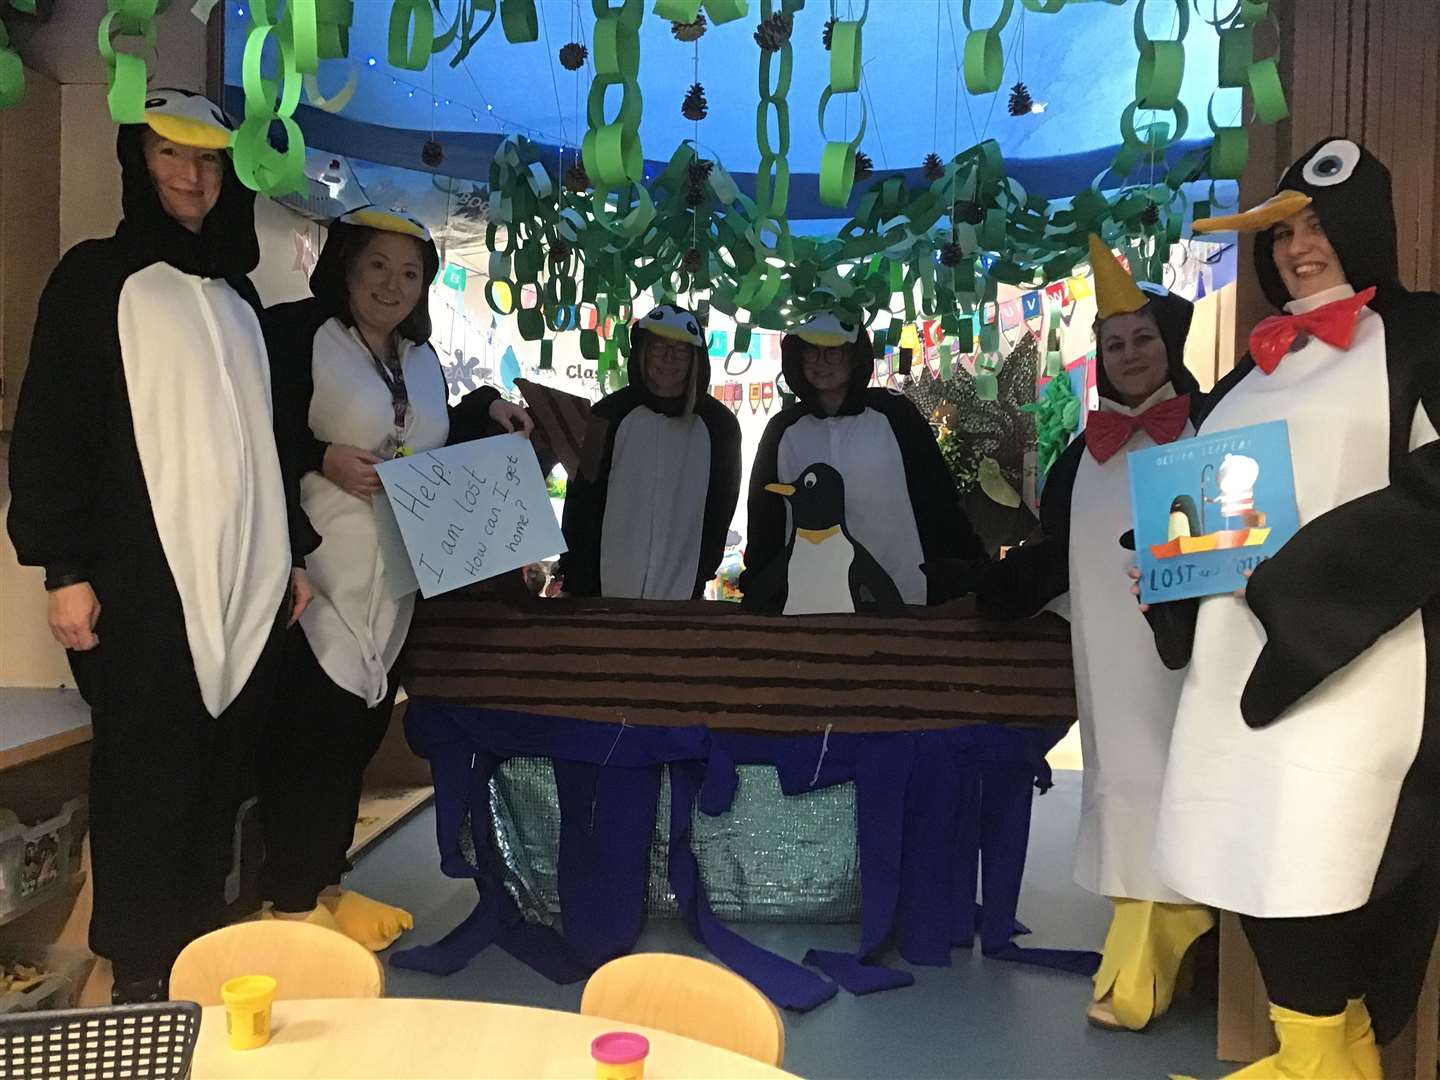 Staff at St Michael's Catholic Primary School, dressed up to welcome the pupils back. Picture: St Michael's Catholic Primary School